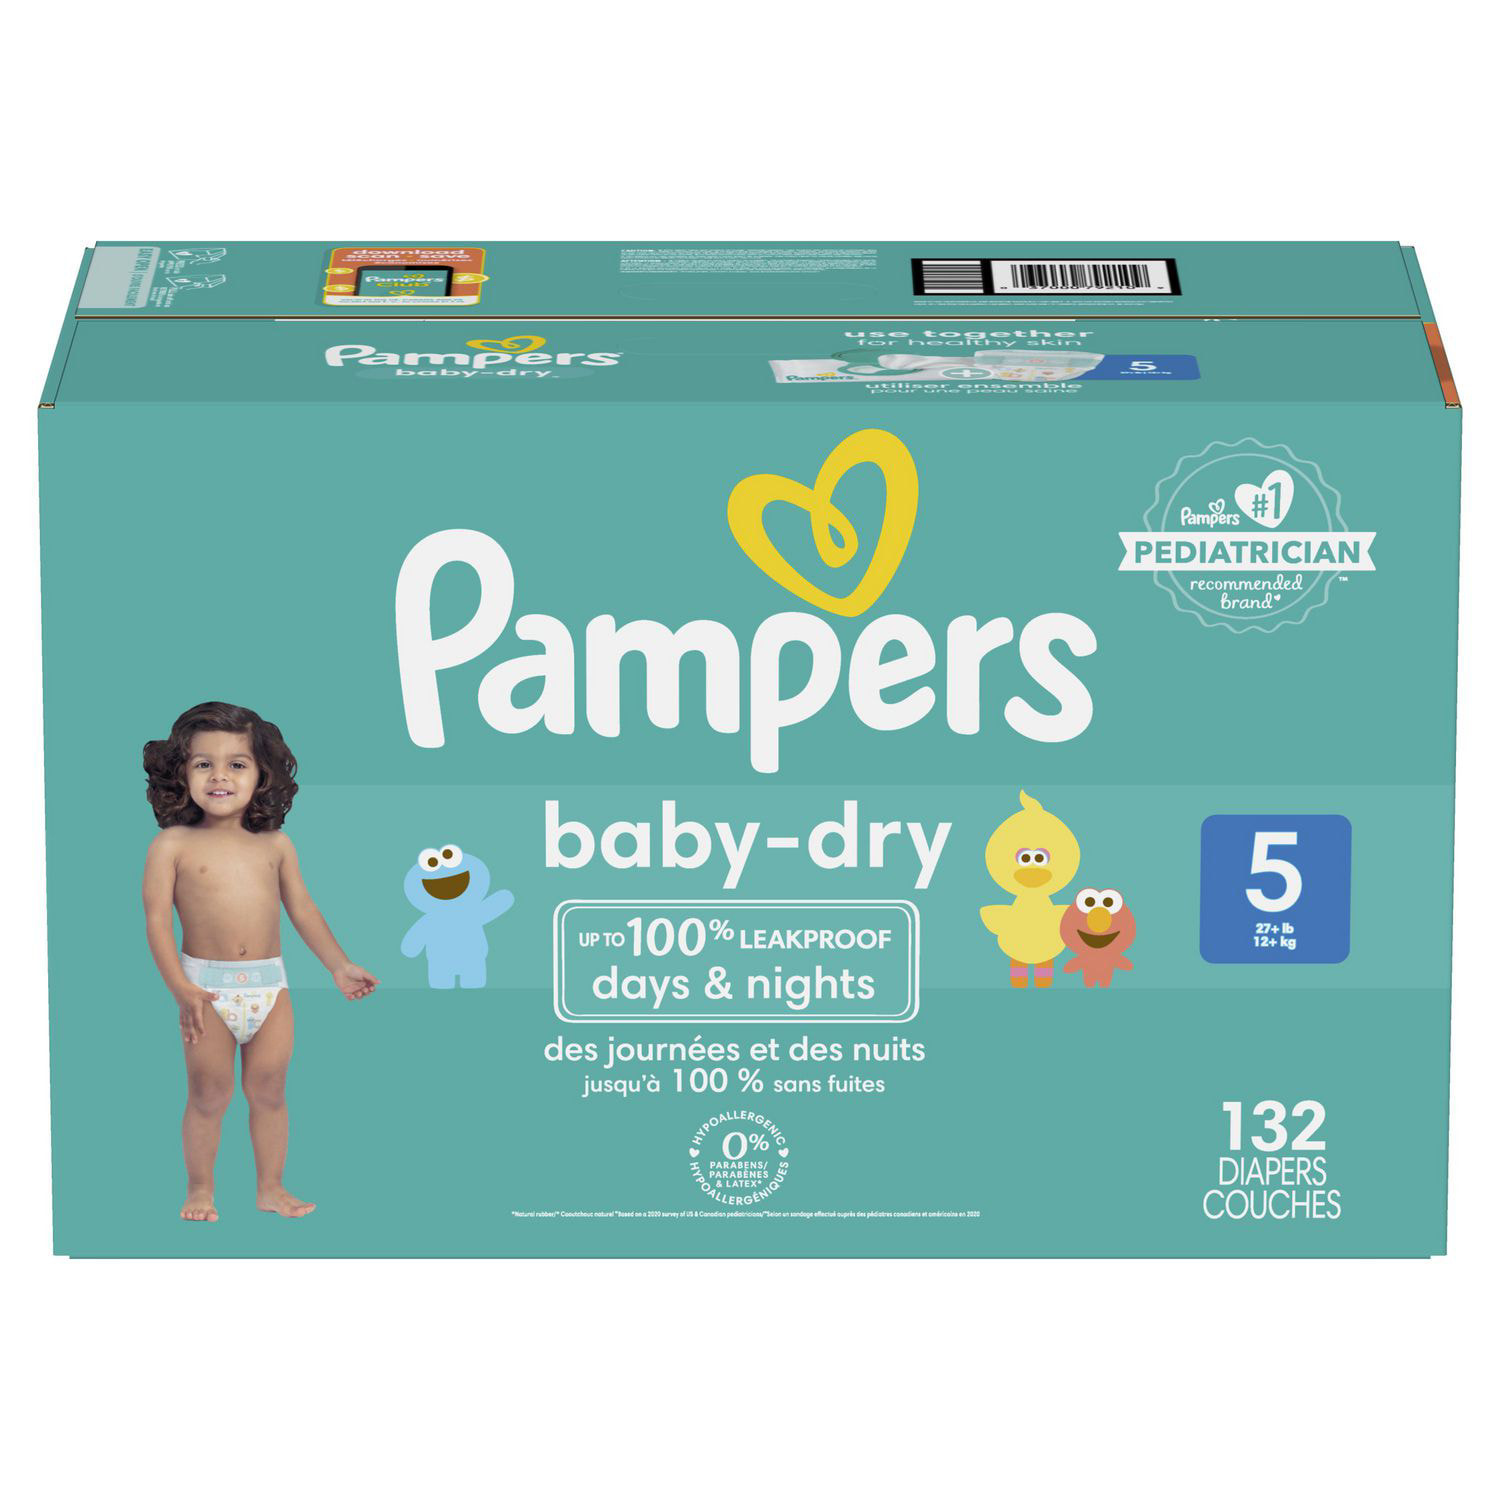 Pampers Baby-Dry Size 3 Nappy Pants Essential Pack